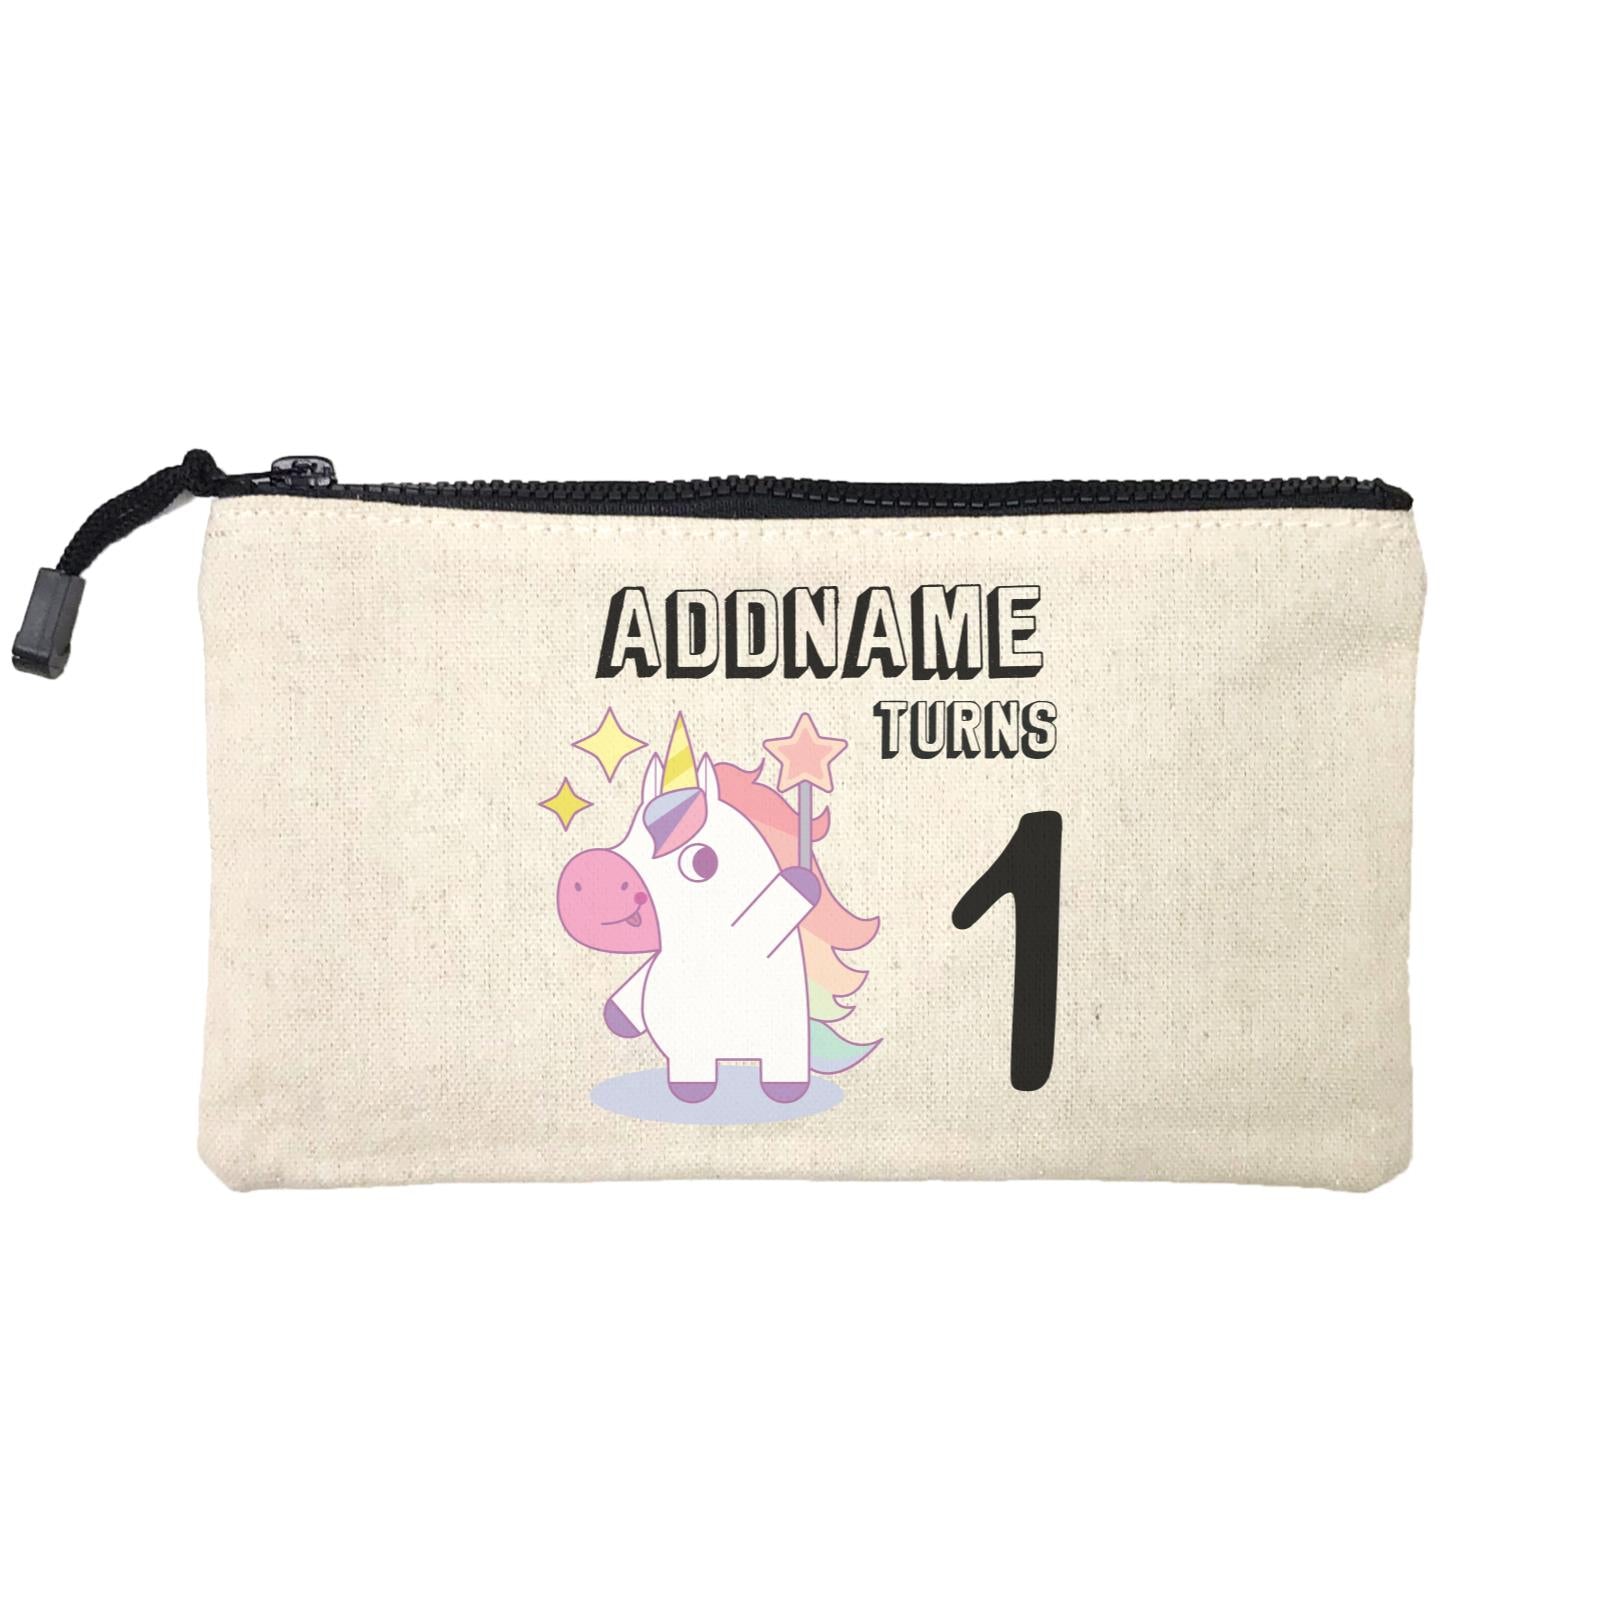 Birthday Unicorn Girl With Magic Wand Addname Turns 1 Mini Accessories Stationery Pouch